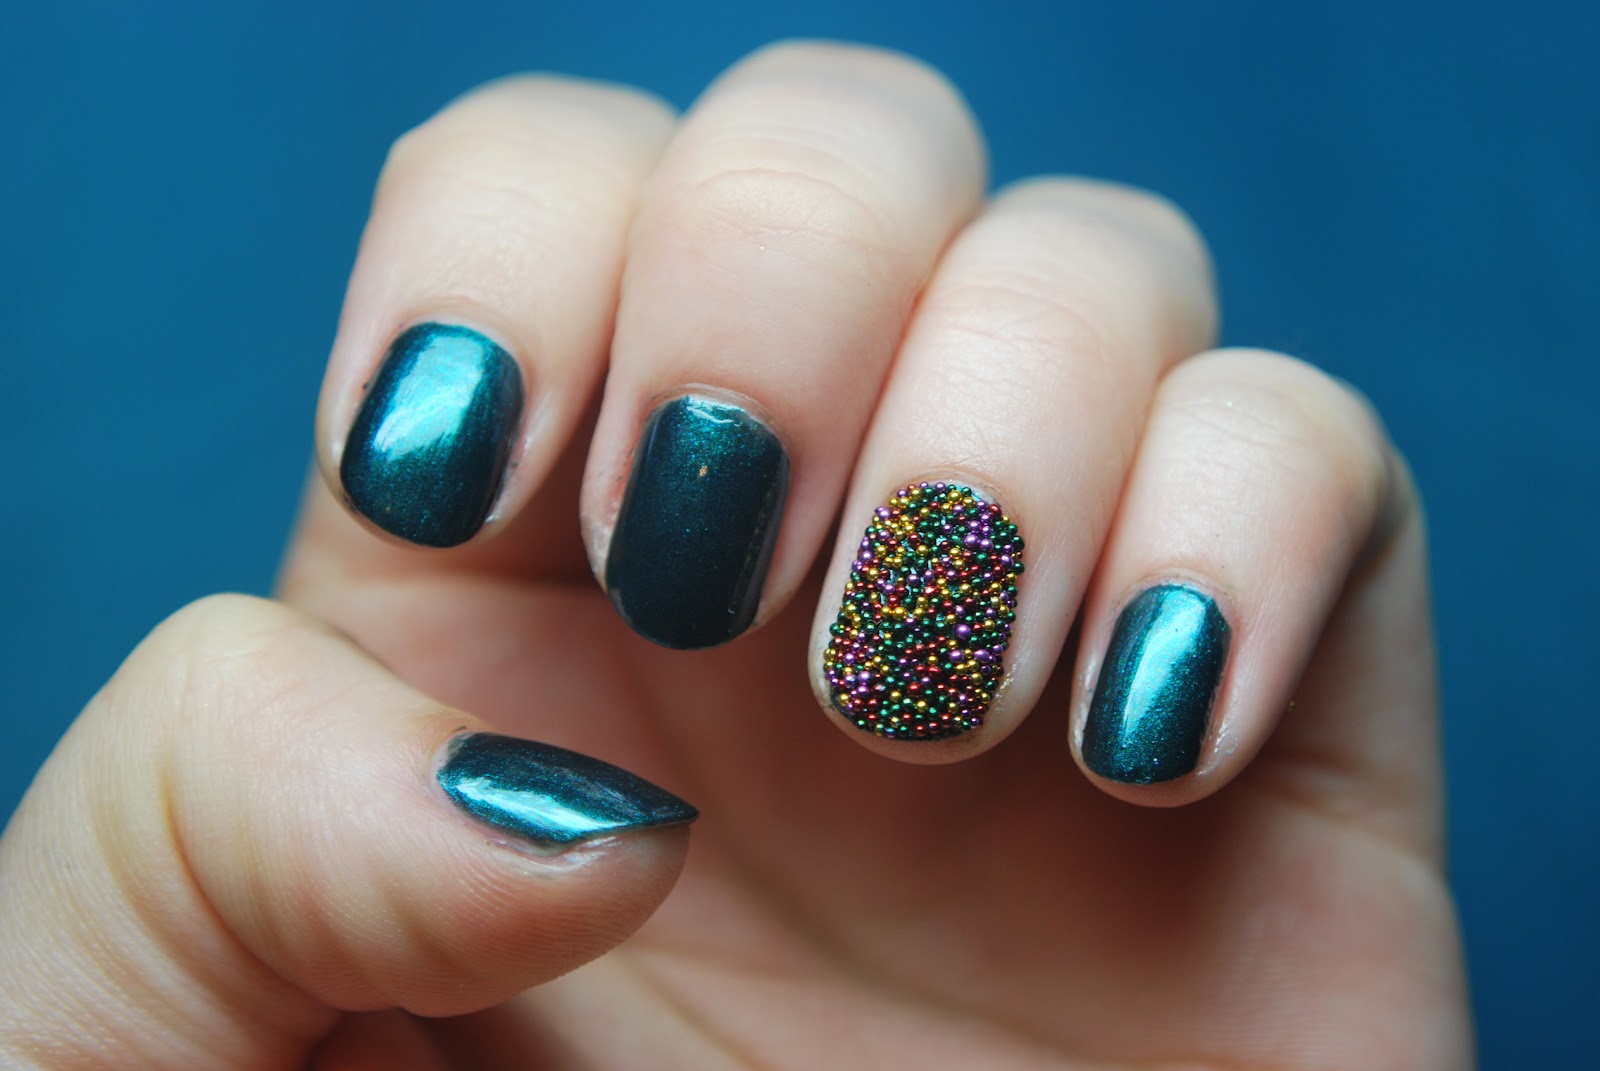 Short Nail Design with Starry Constellations - wide 2